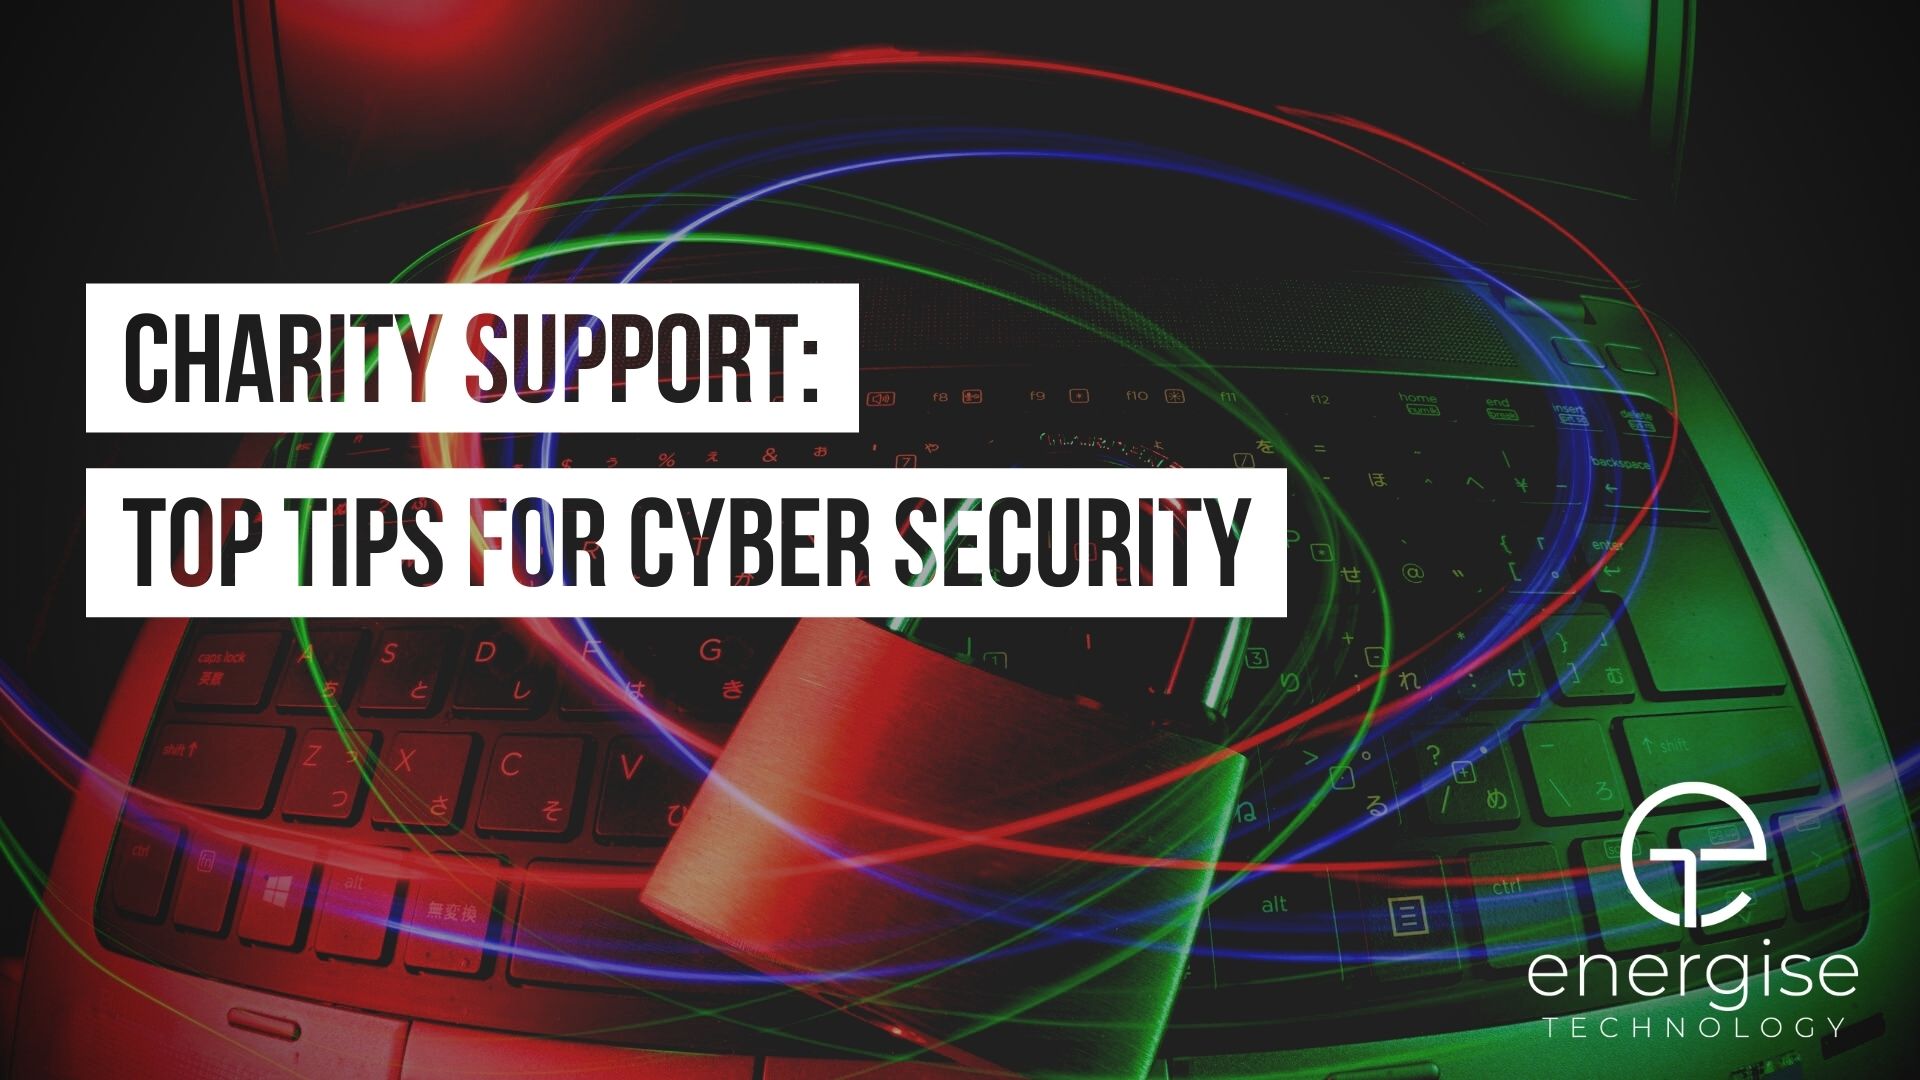 Charity Support: Top 4 Online Security Tips Revealed